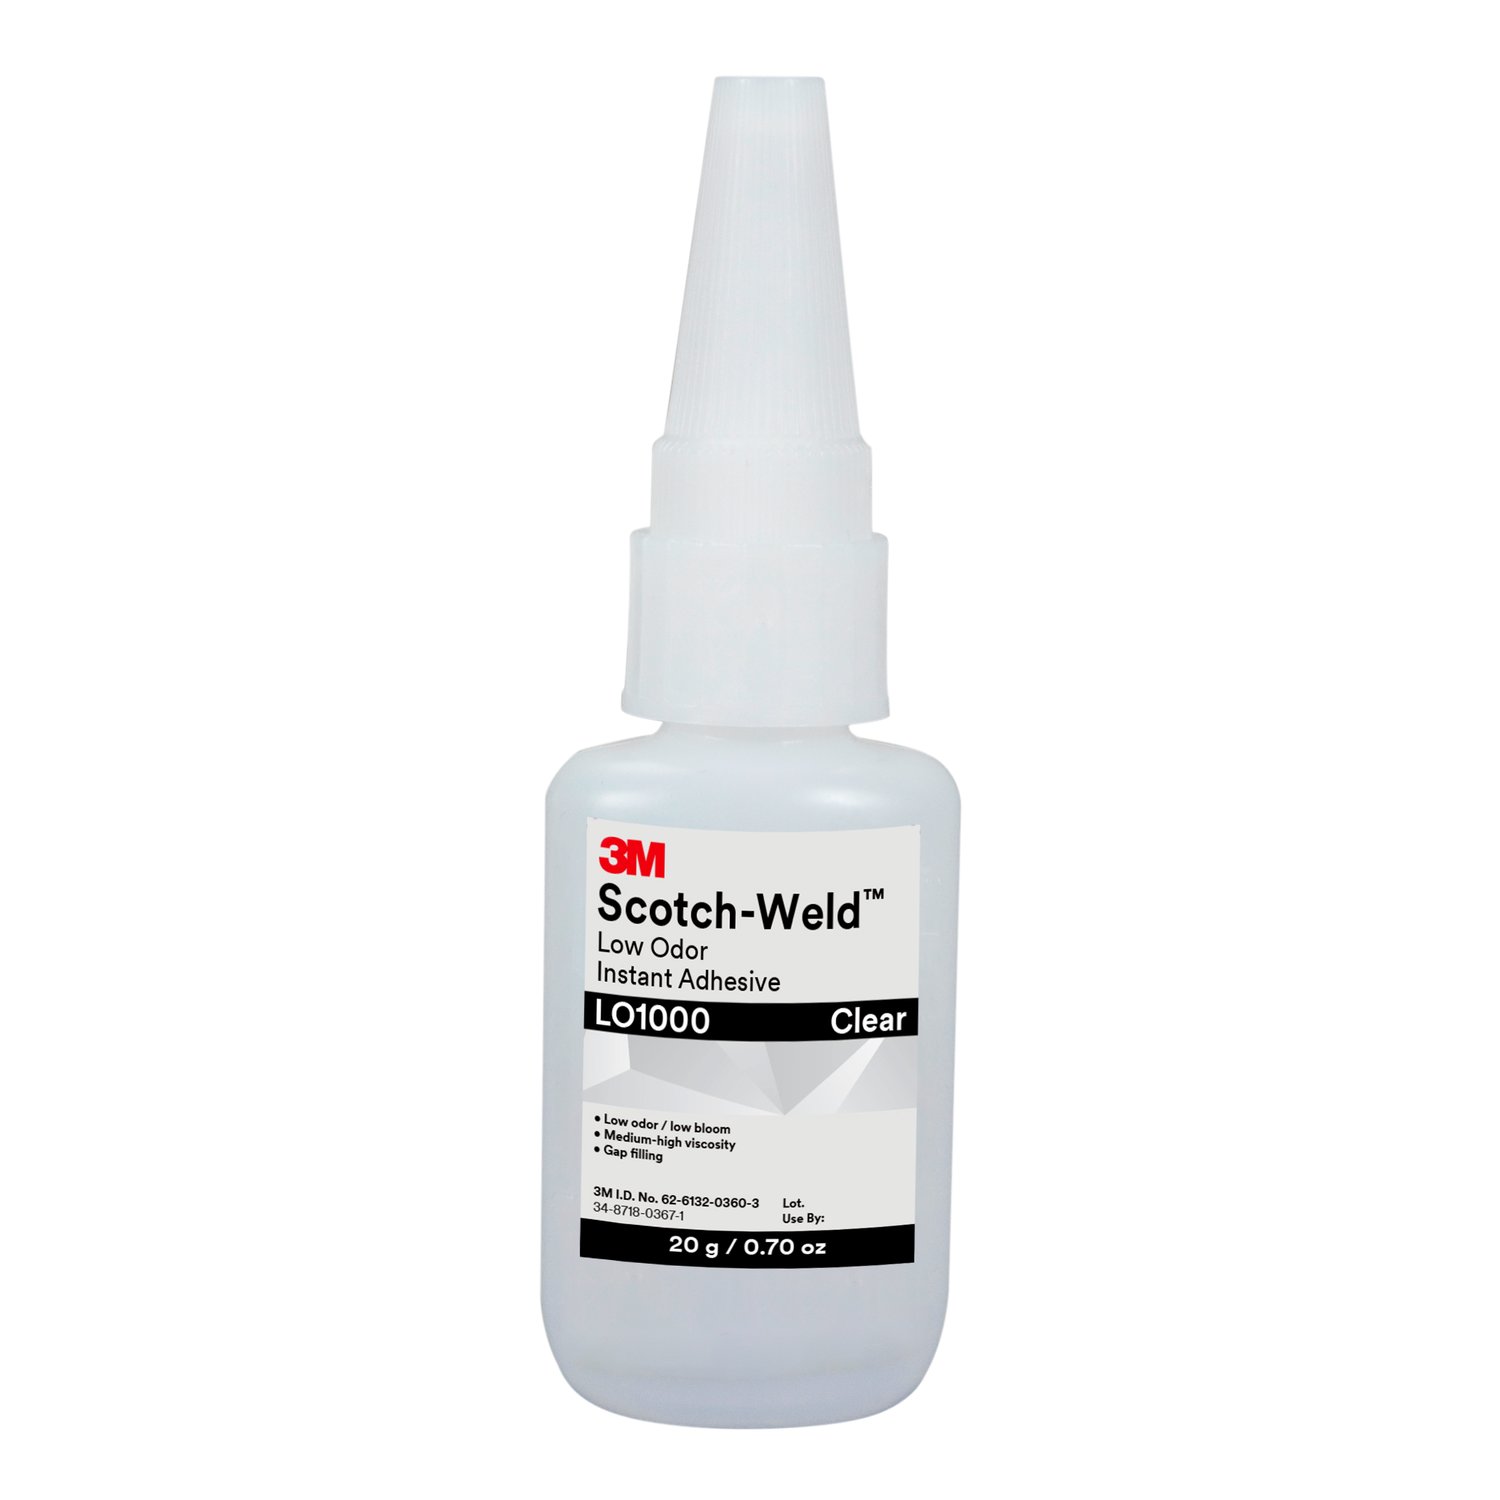 7100039269 - 3M Scotch-Weld Low Odor Instant Adhesive LO1000, Clear, 20 Gram
Bottle, 10/case